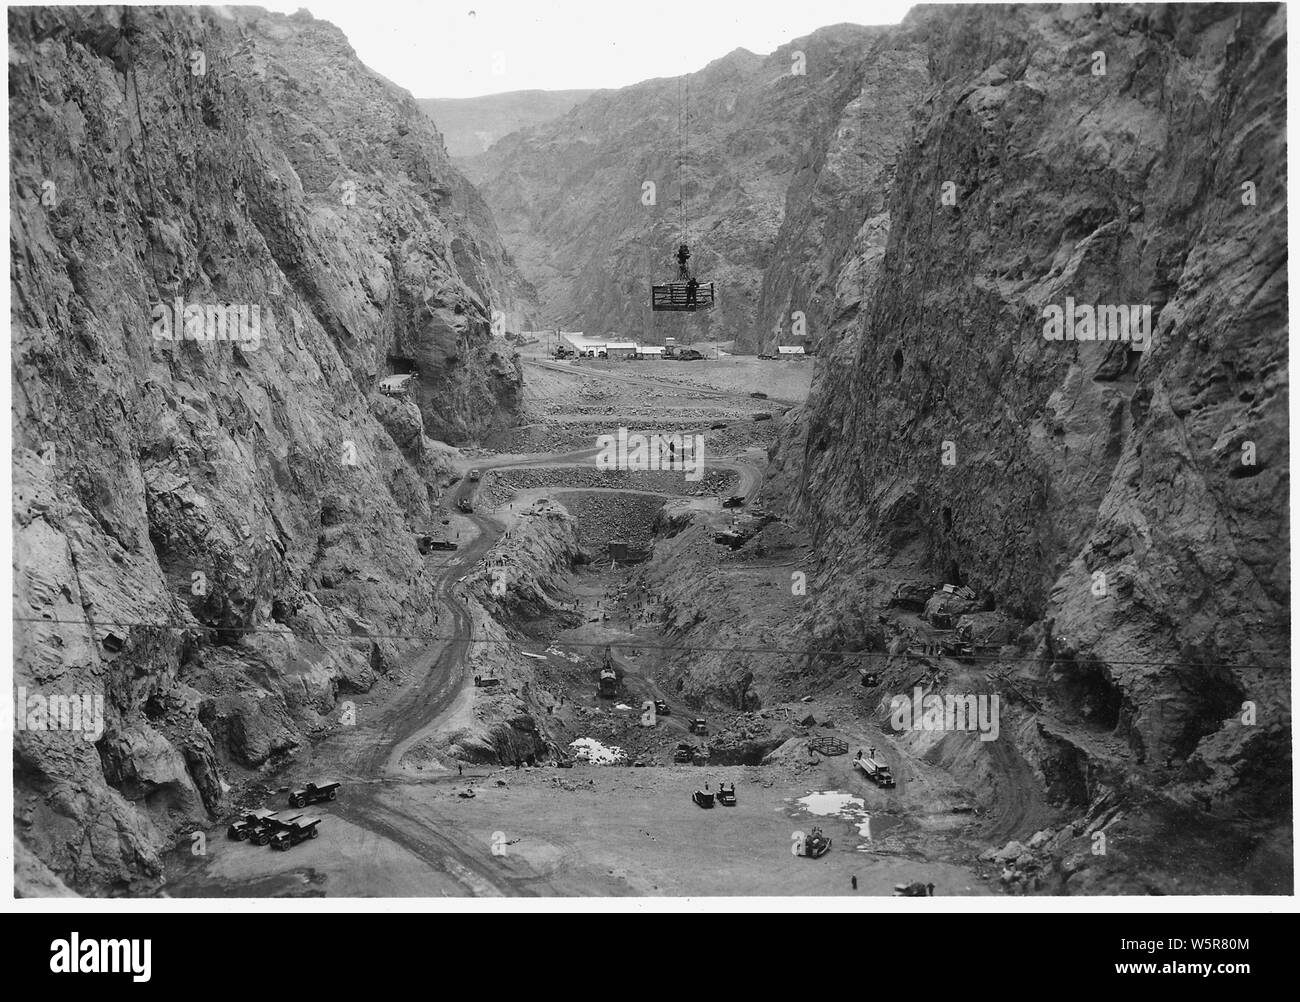 Looking upstream through foundation excavation at dam site and power plant location. View from suspension bridge at outlet valve house benches.; Scope and content:  Photograph from Volume Two of a series of photo albums documenting the construction of Hoover Dam, Boulder City, Nevada. Stock Photo